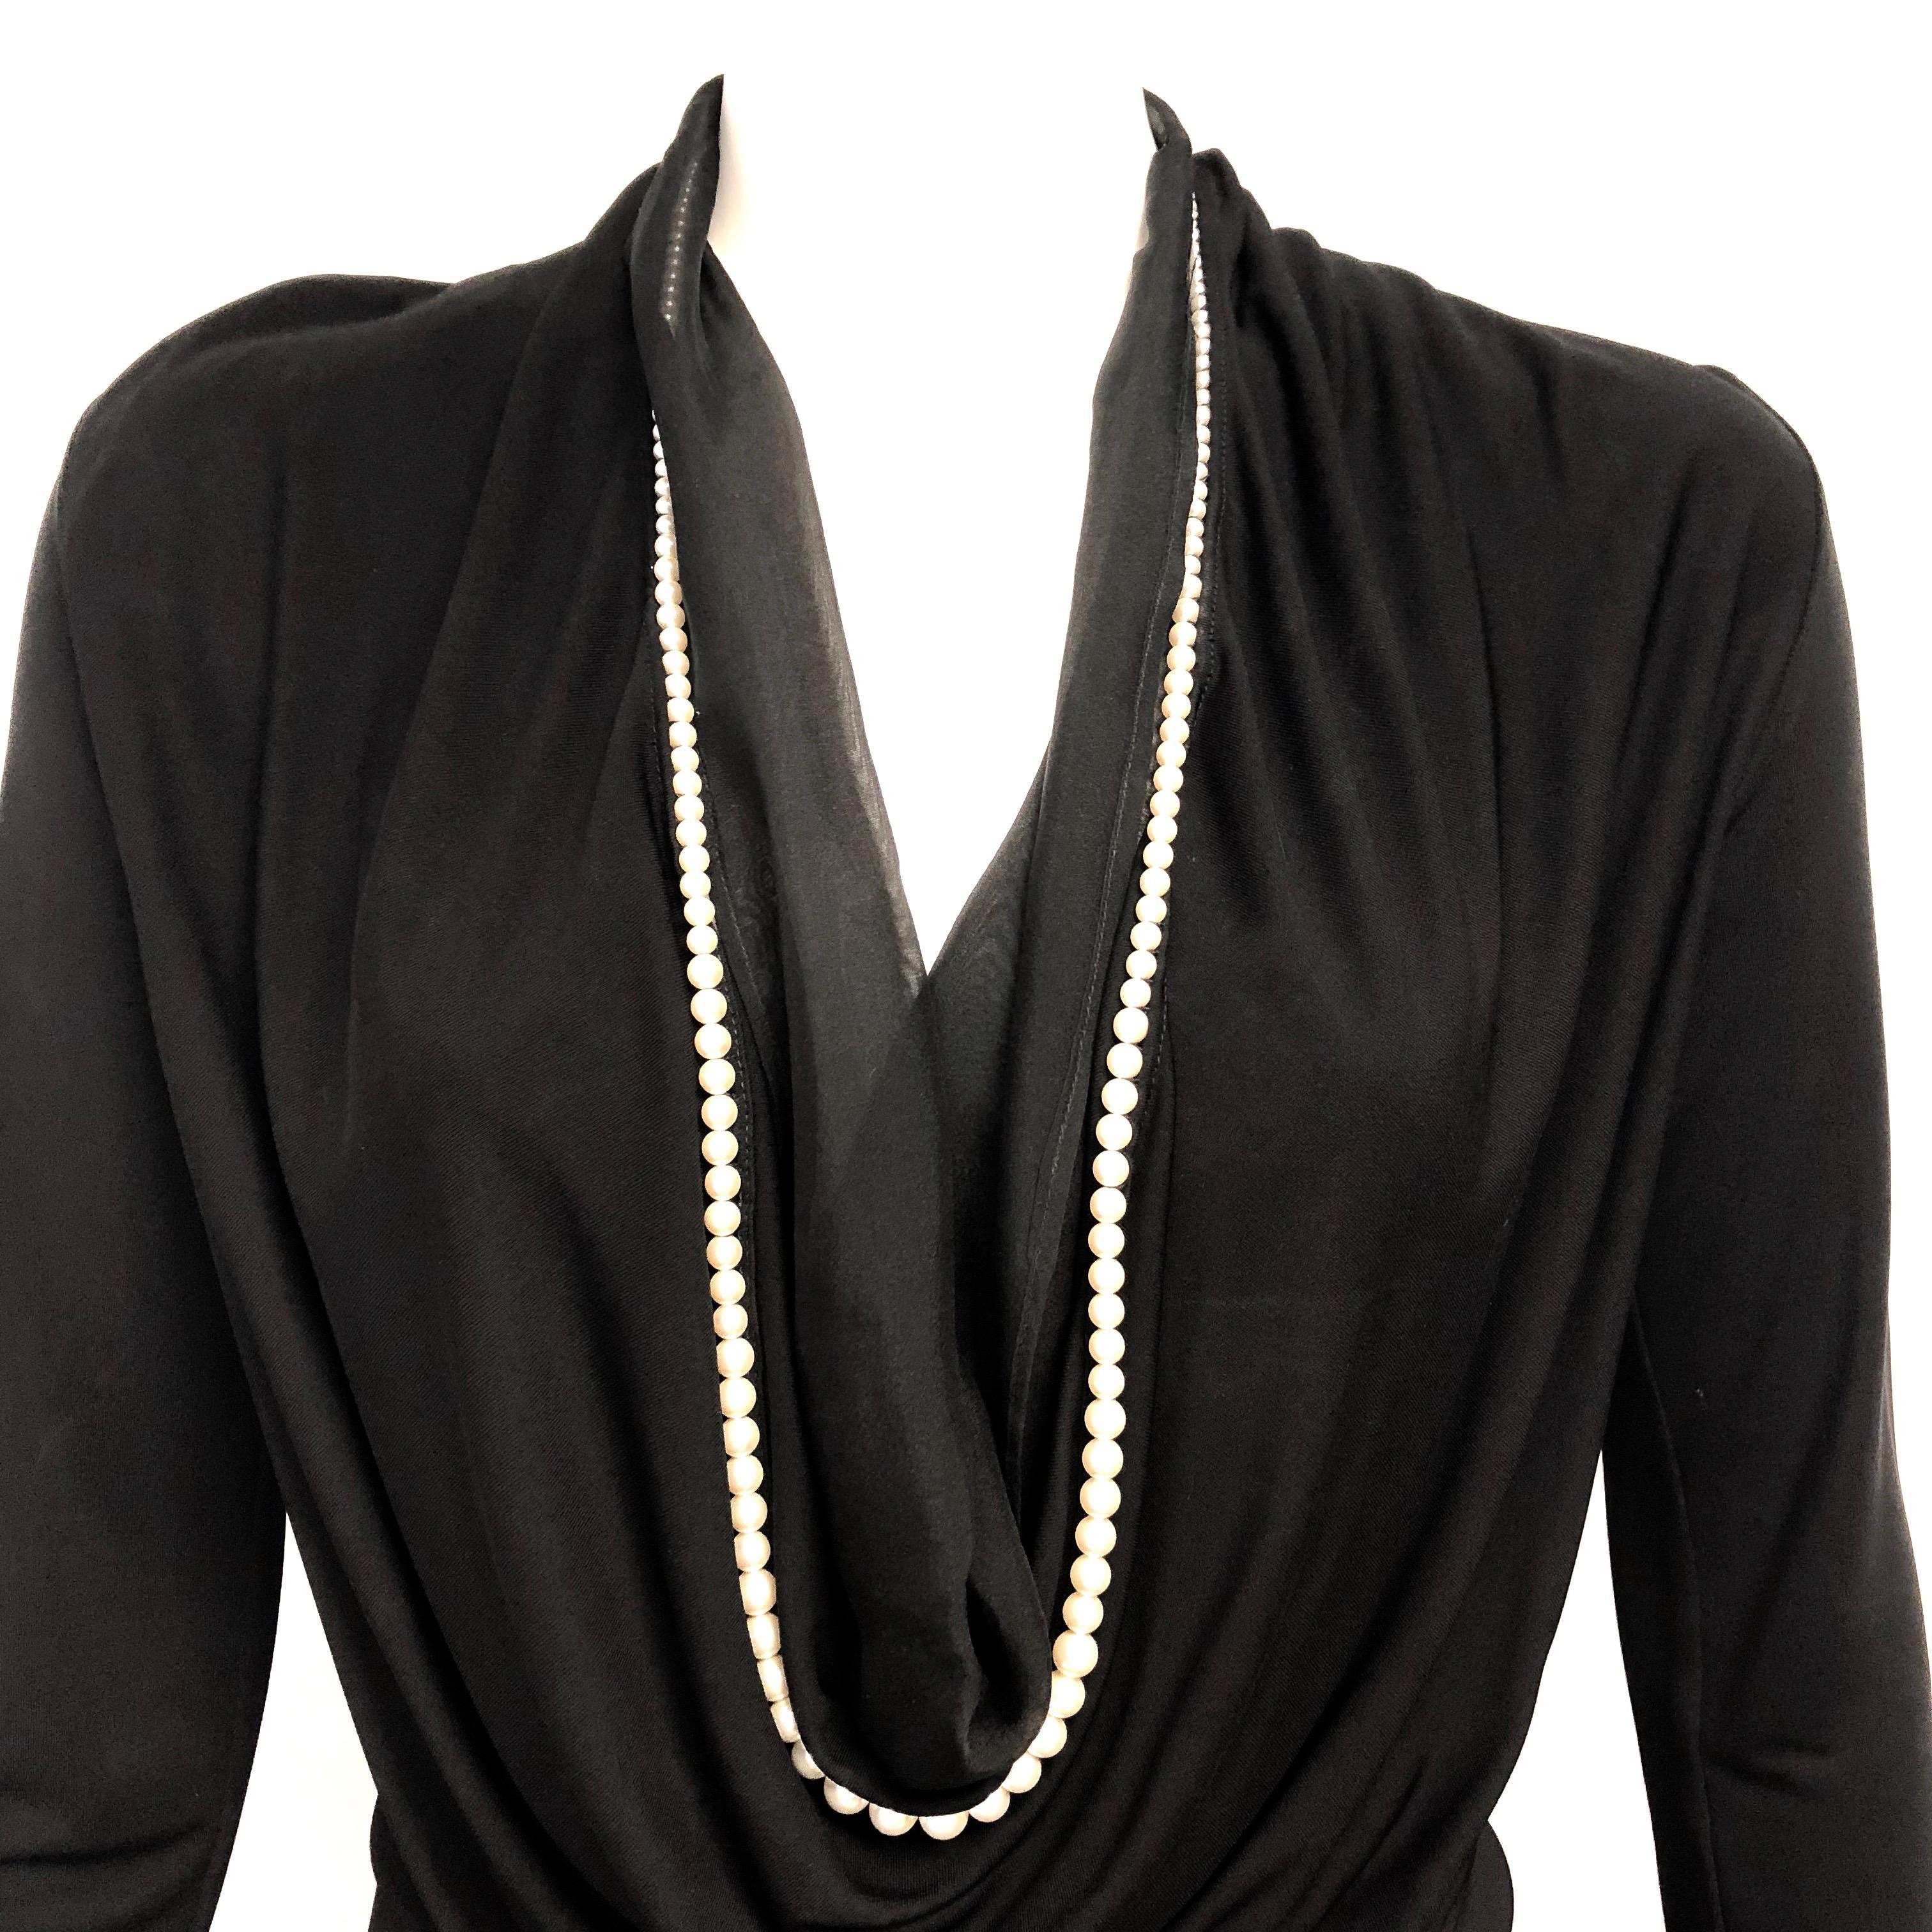 Vintage Jean Paul Gaultier black jersey plunging neckline dress with attached white pearl strand collar. The dress has a sheer silk chiffon lining around the neckline cleavage. Classy and timeless.   
Size: 6 US / 8 GB / 40 I / 36 F / 36